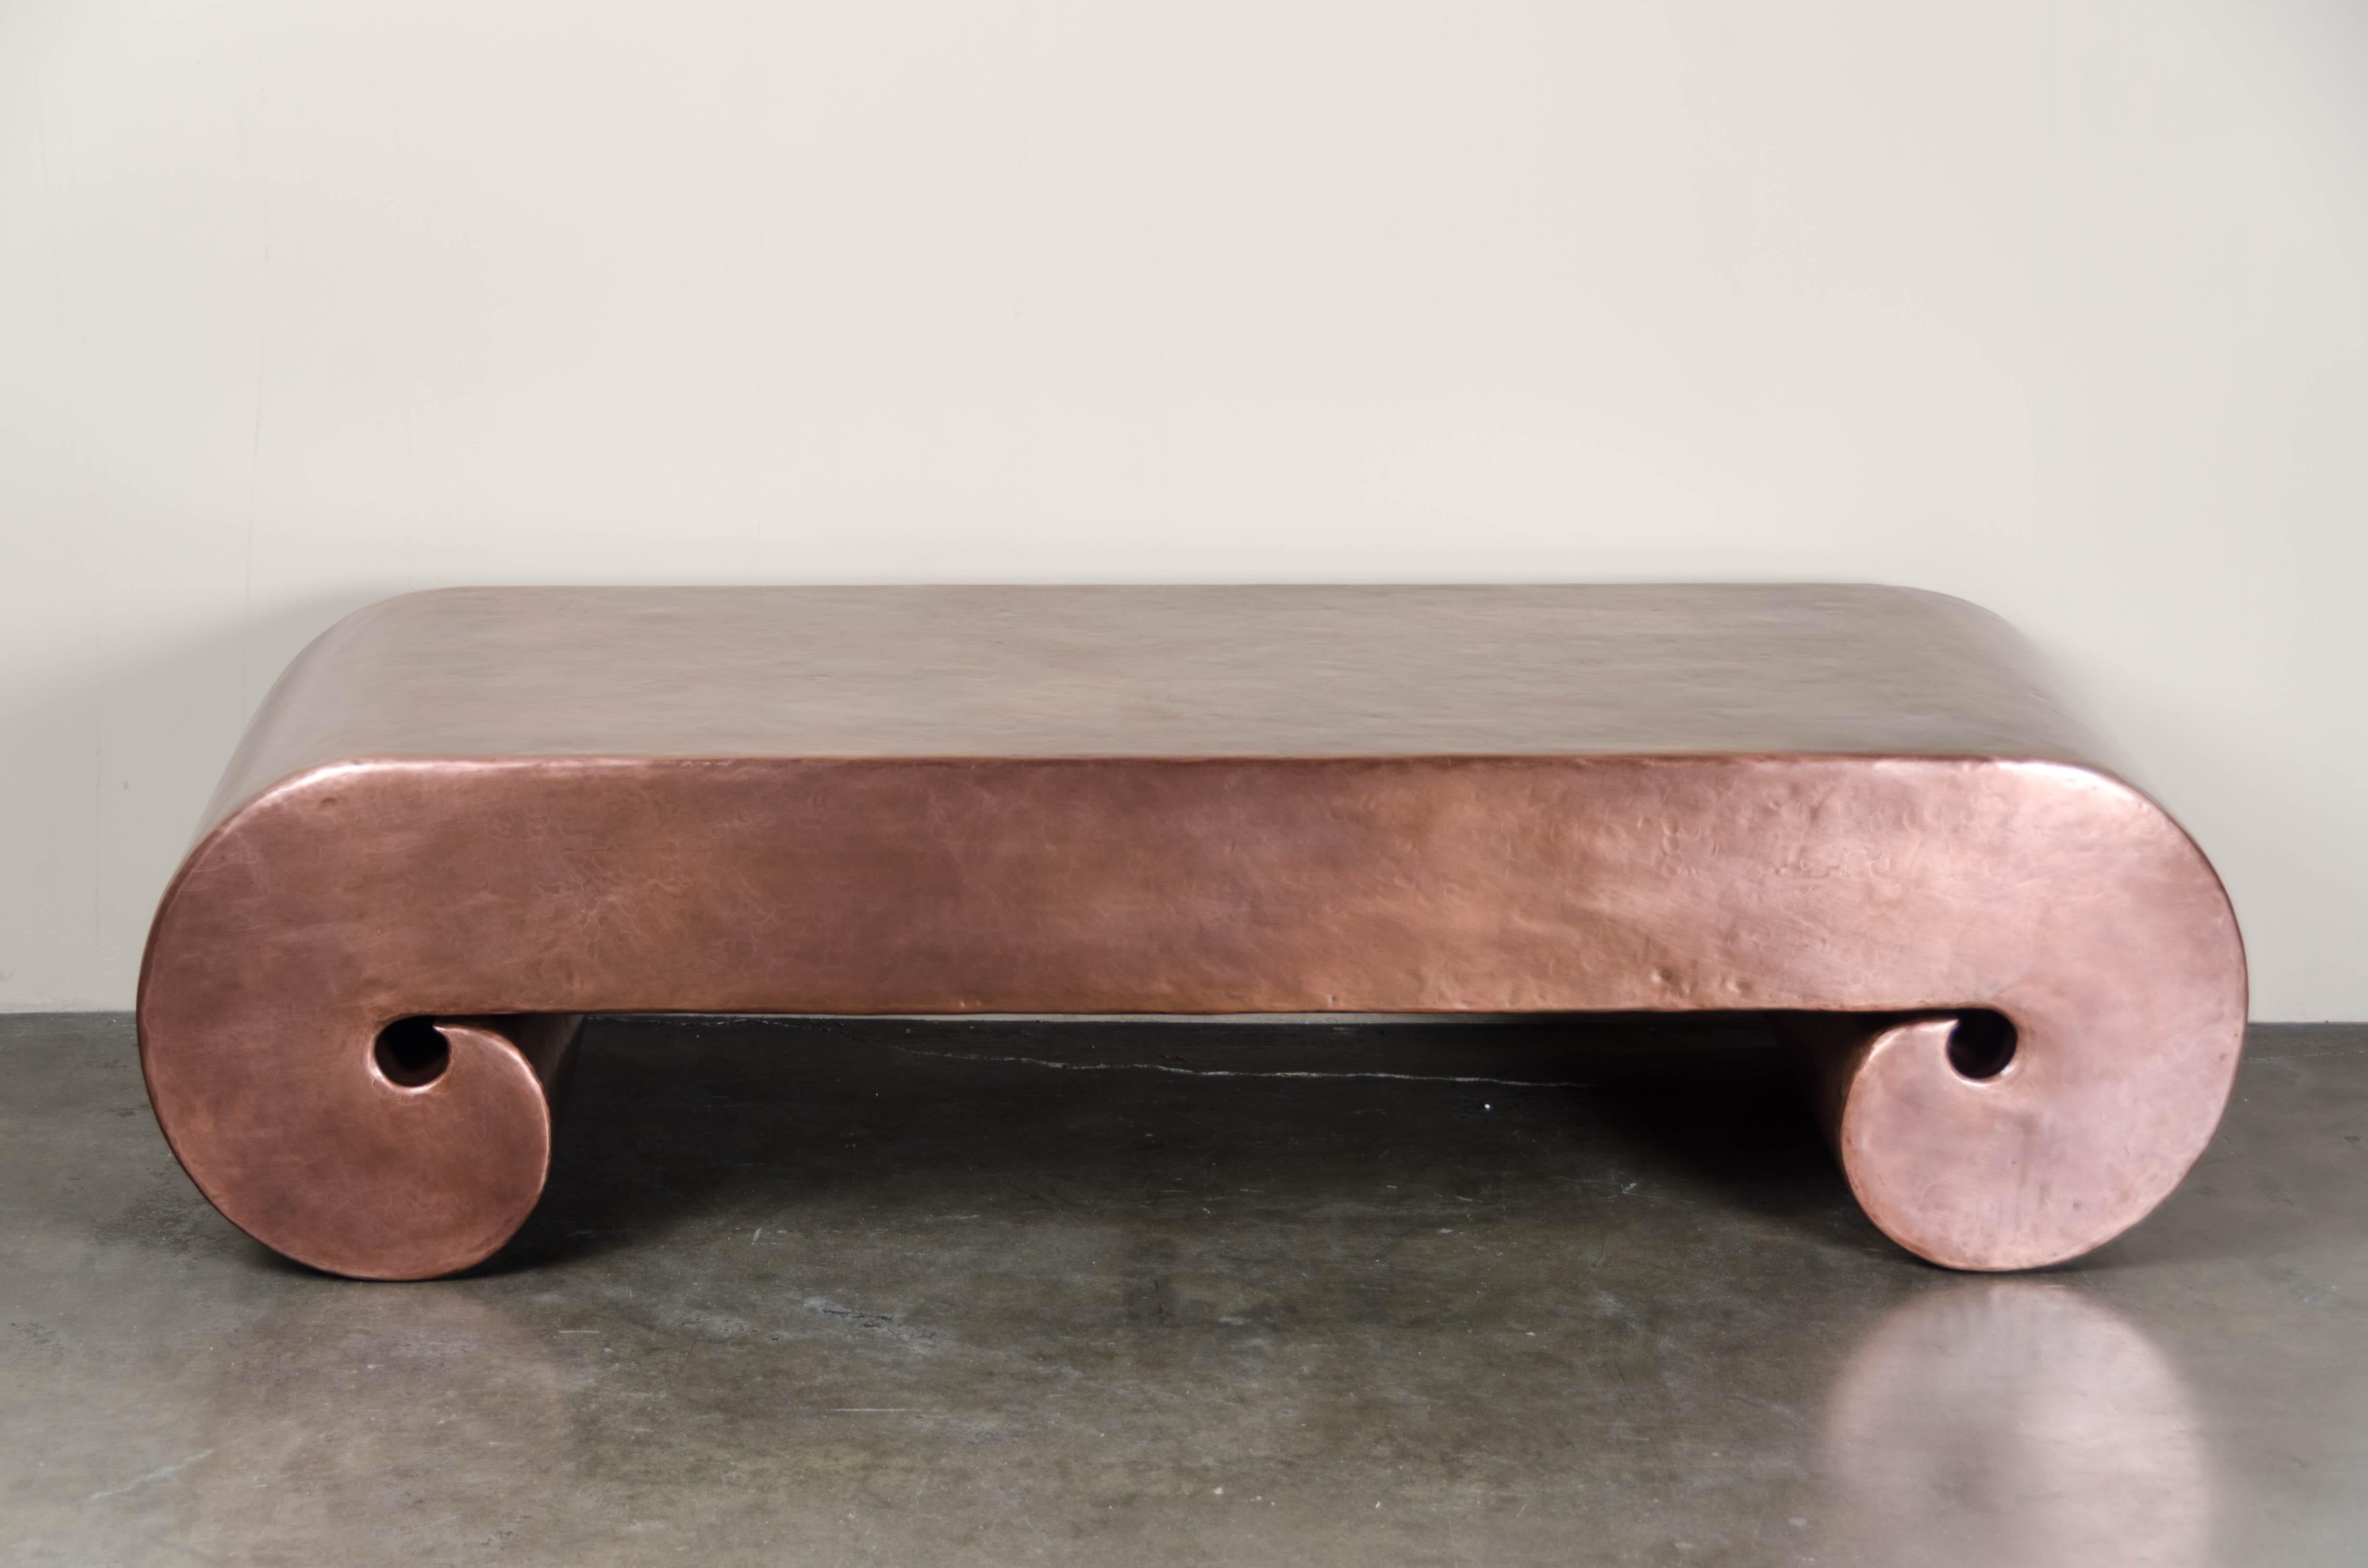 Low scroll design table
Antique copper
Hand repoussé
Wood base
Limited edition

Repousse´ is the traditional art of hand-hammering decorative relief onto sheet metal. The technique originated around 800 BC between Asia and Europe and in